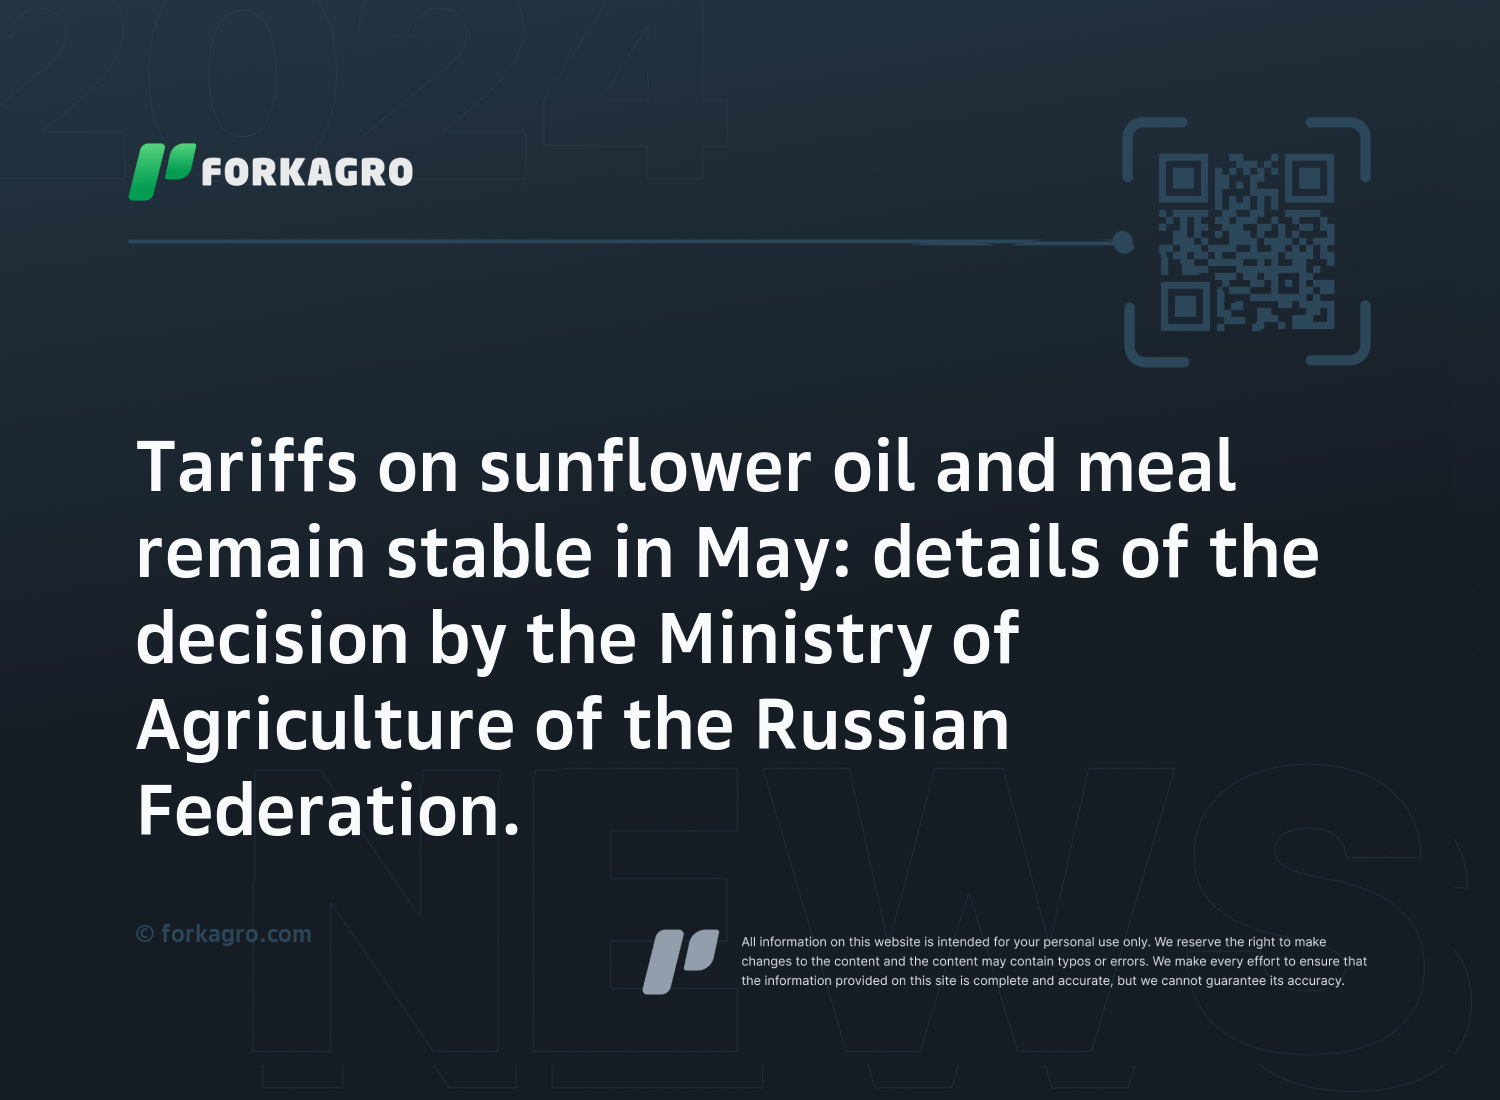 Tariffs on sunflower oil and meal remain stable in May: details of the decision by the Ministry of Agriculture of the Russian Federation.